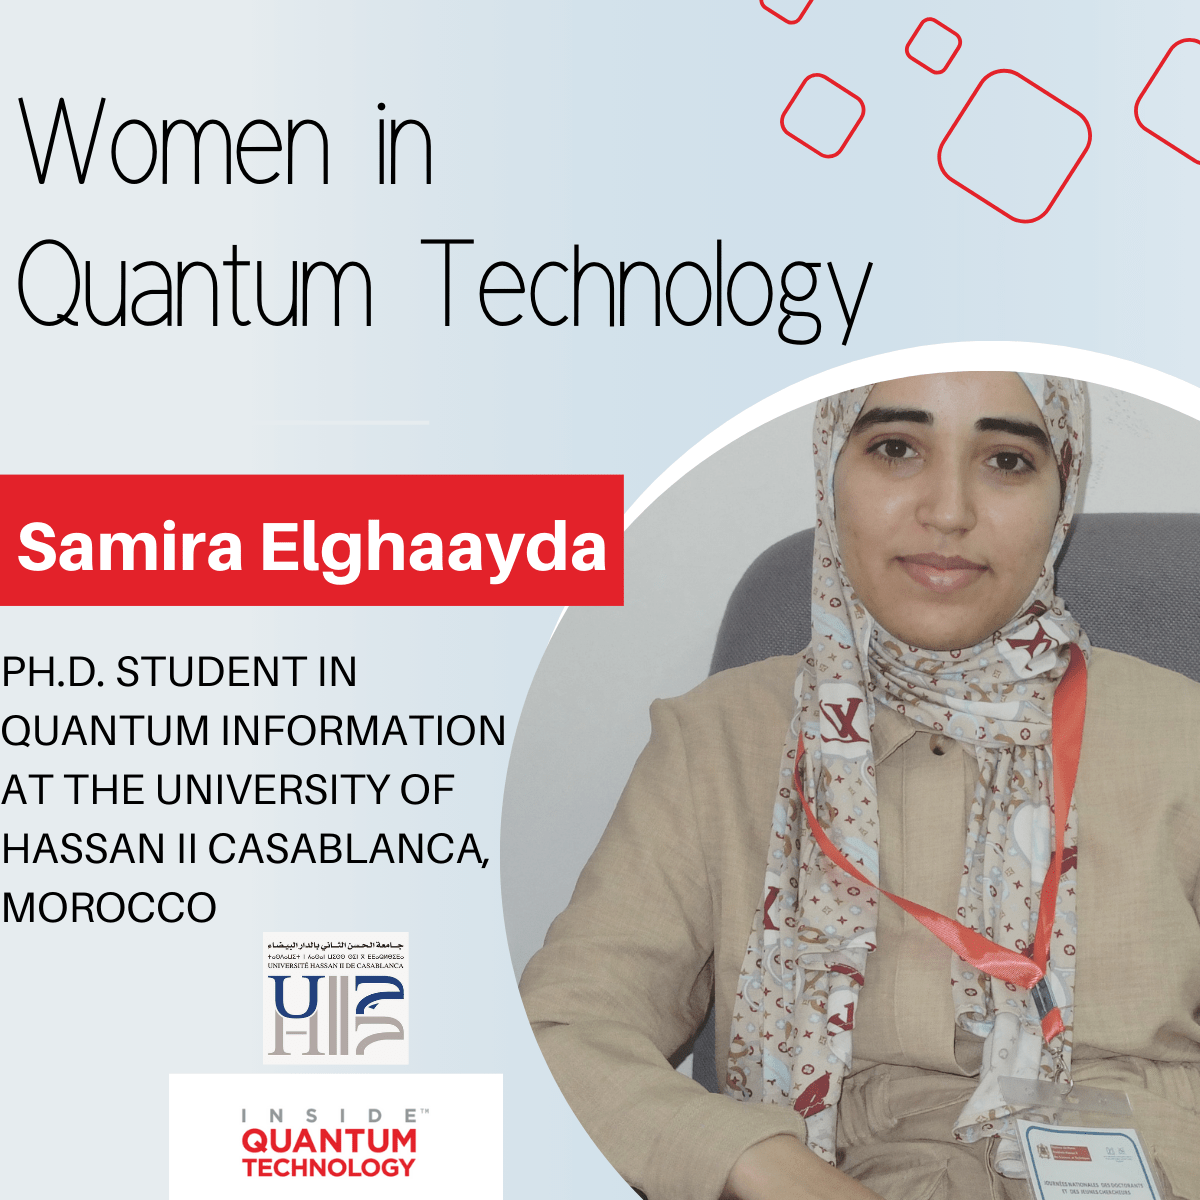 SAMIRA ELGHAAYDA is a PhD student at the University of Hassan II Casablanca, learning quantum information.